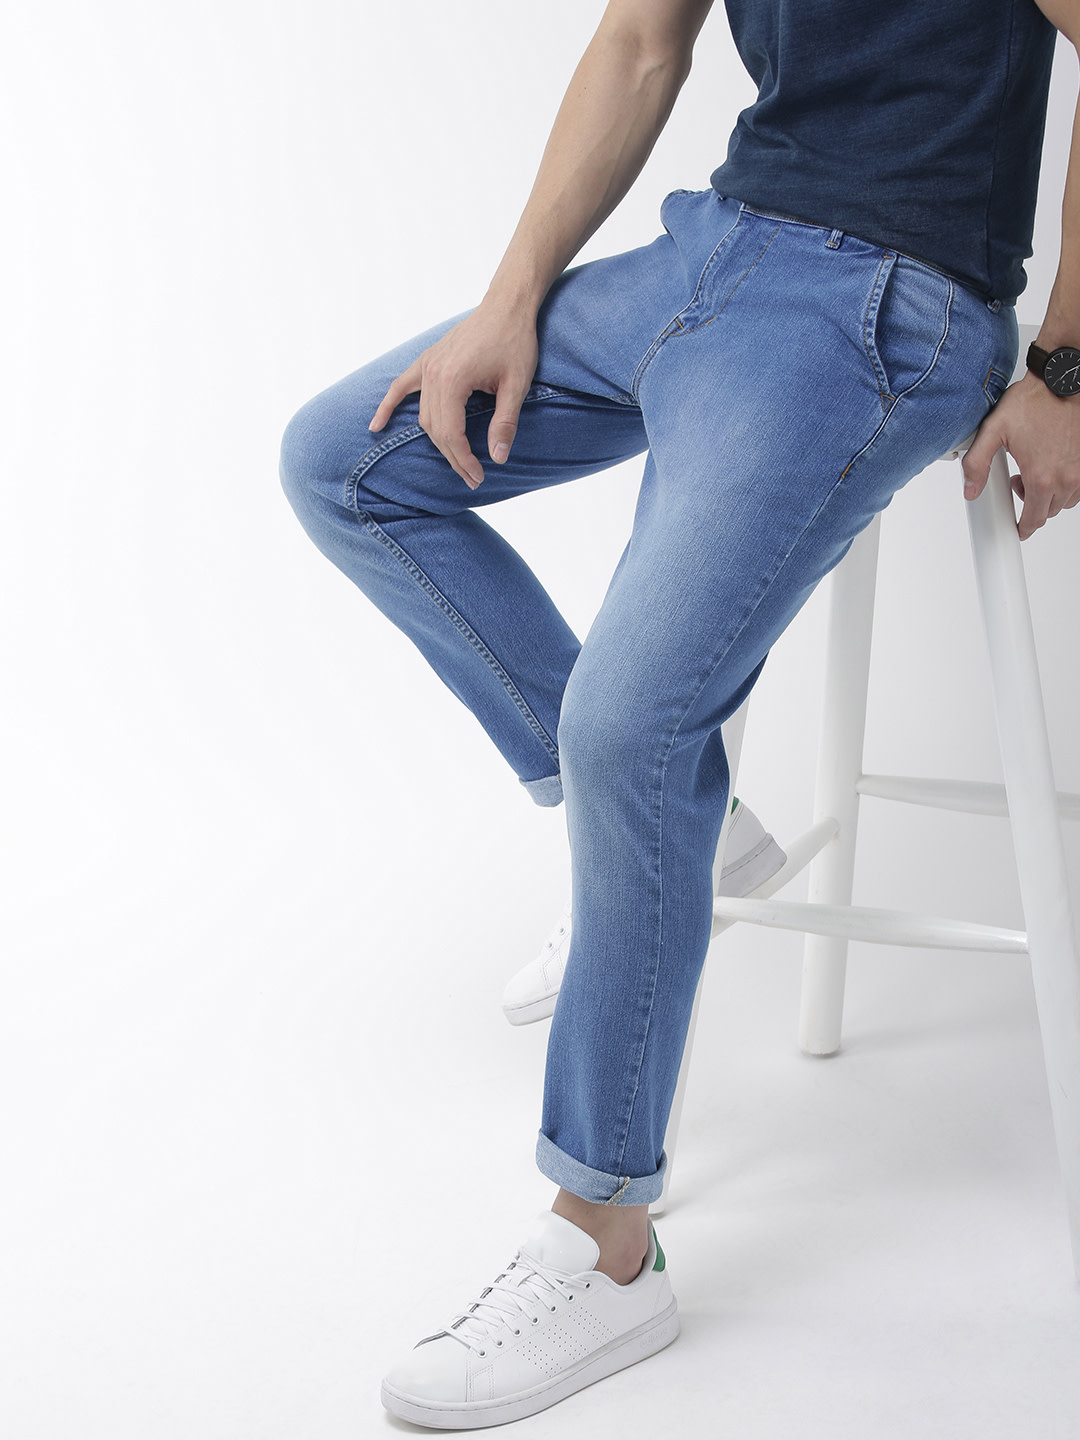 Common Blue Jeans – The Engineers of Clothes